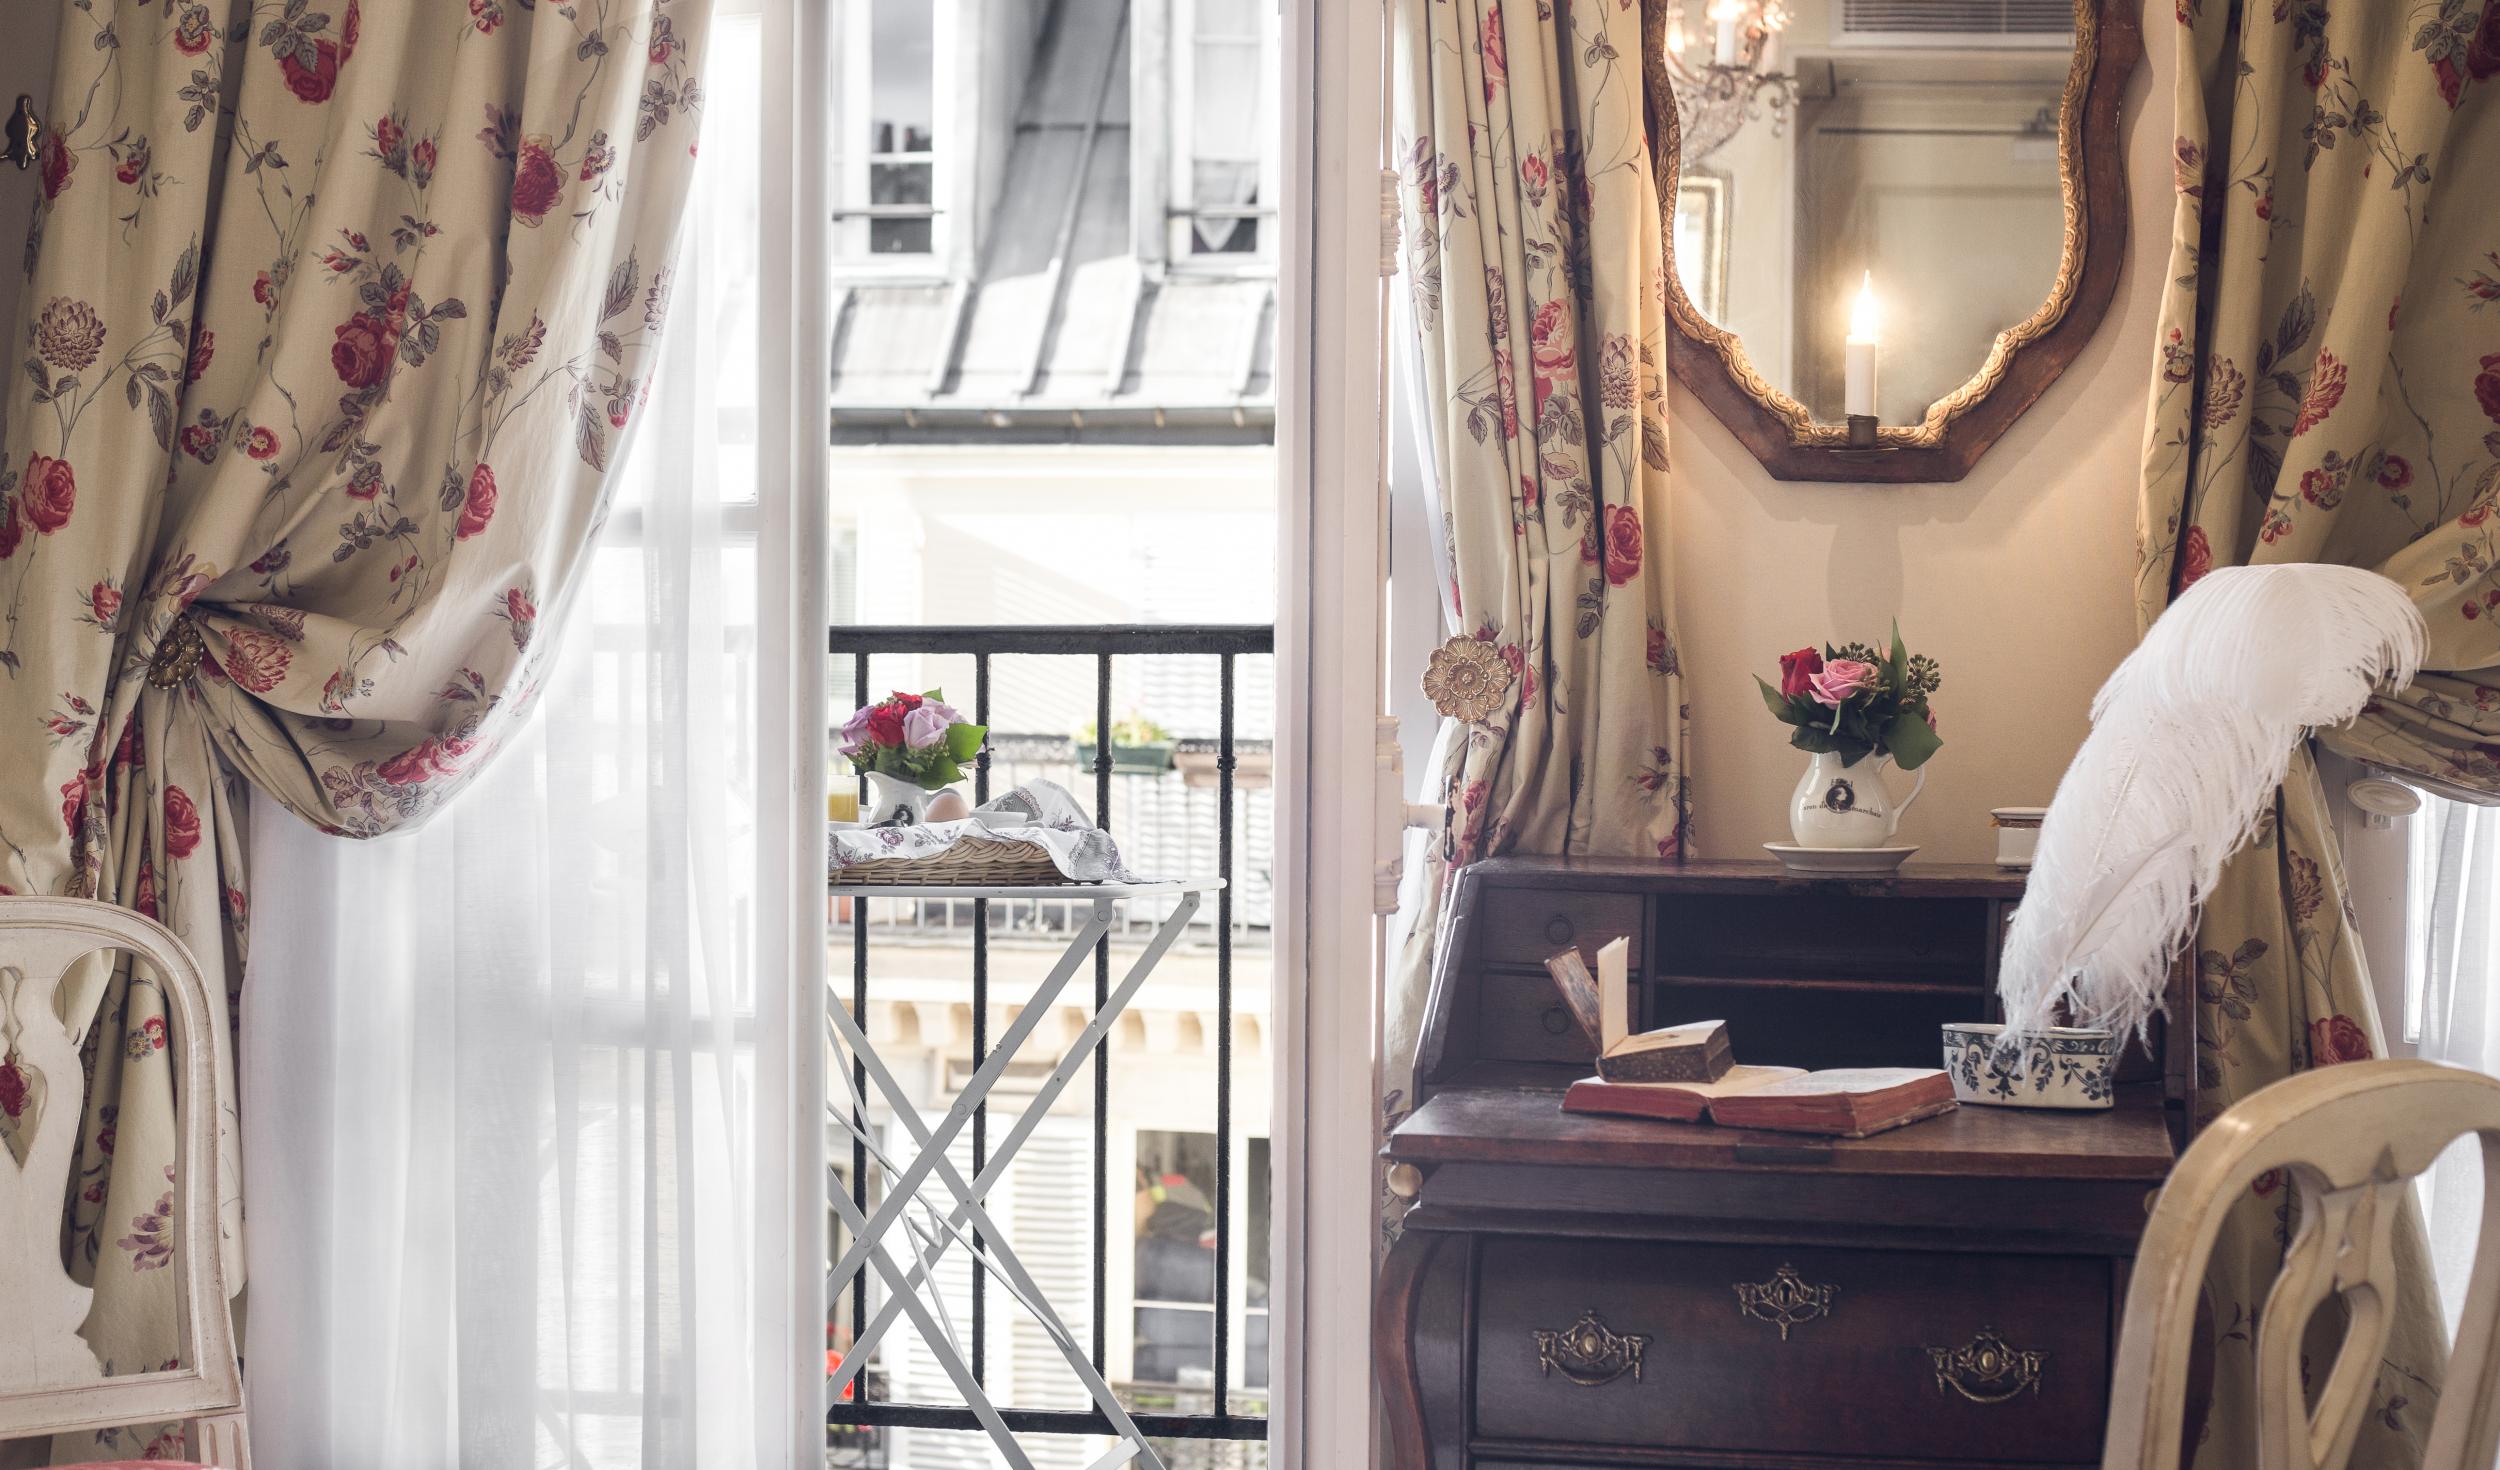 The hotel is named after the 18th-century playwright, Beaumarchais